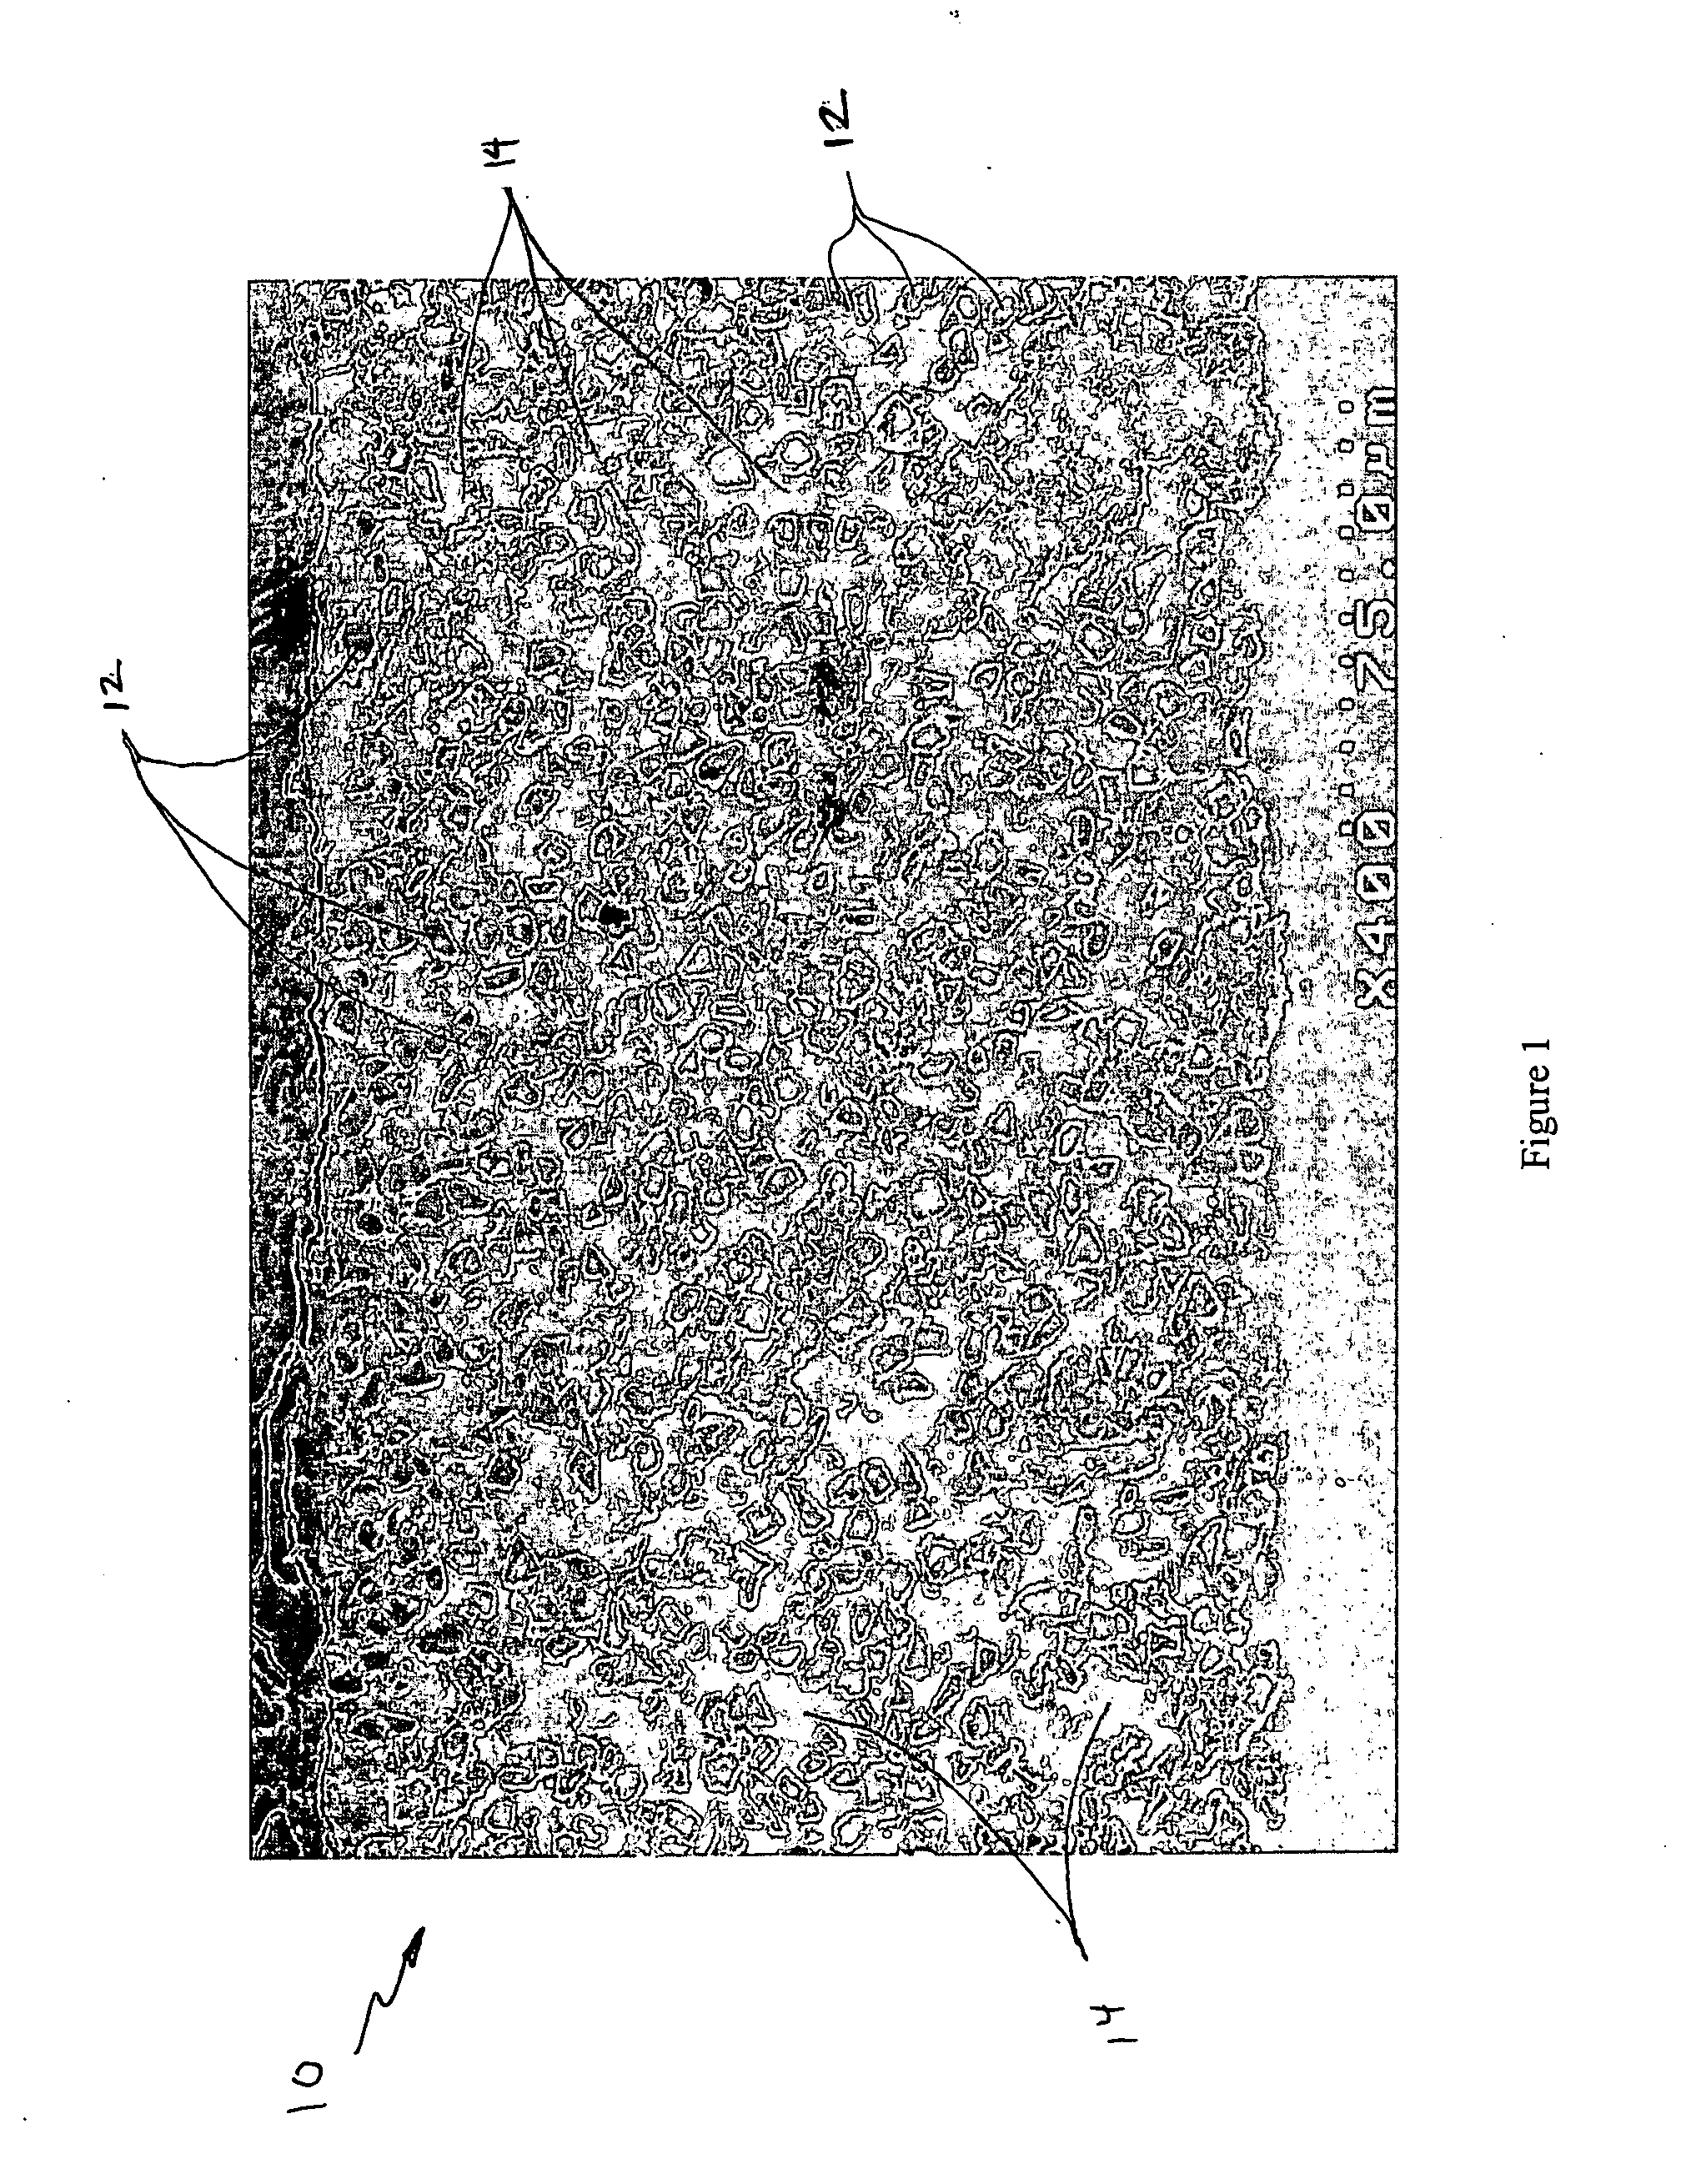 Erosion resistant coatings and methods thereof